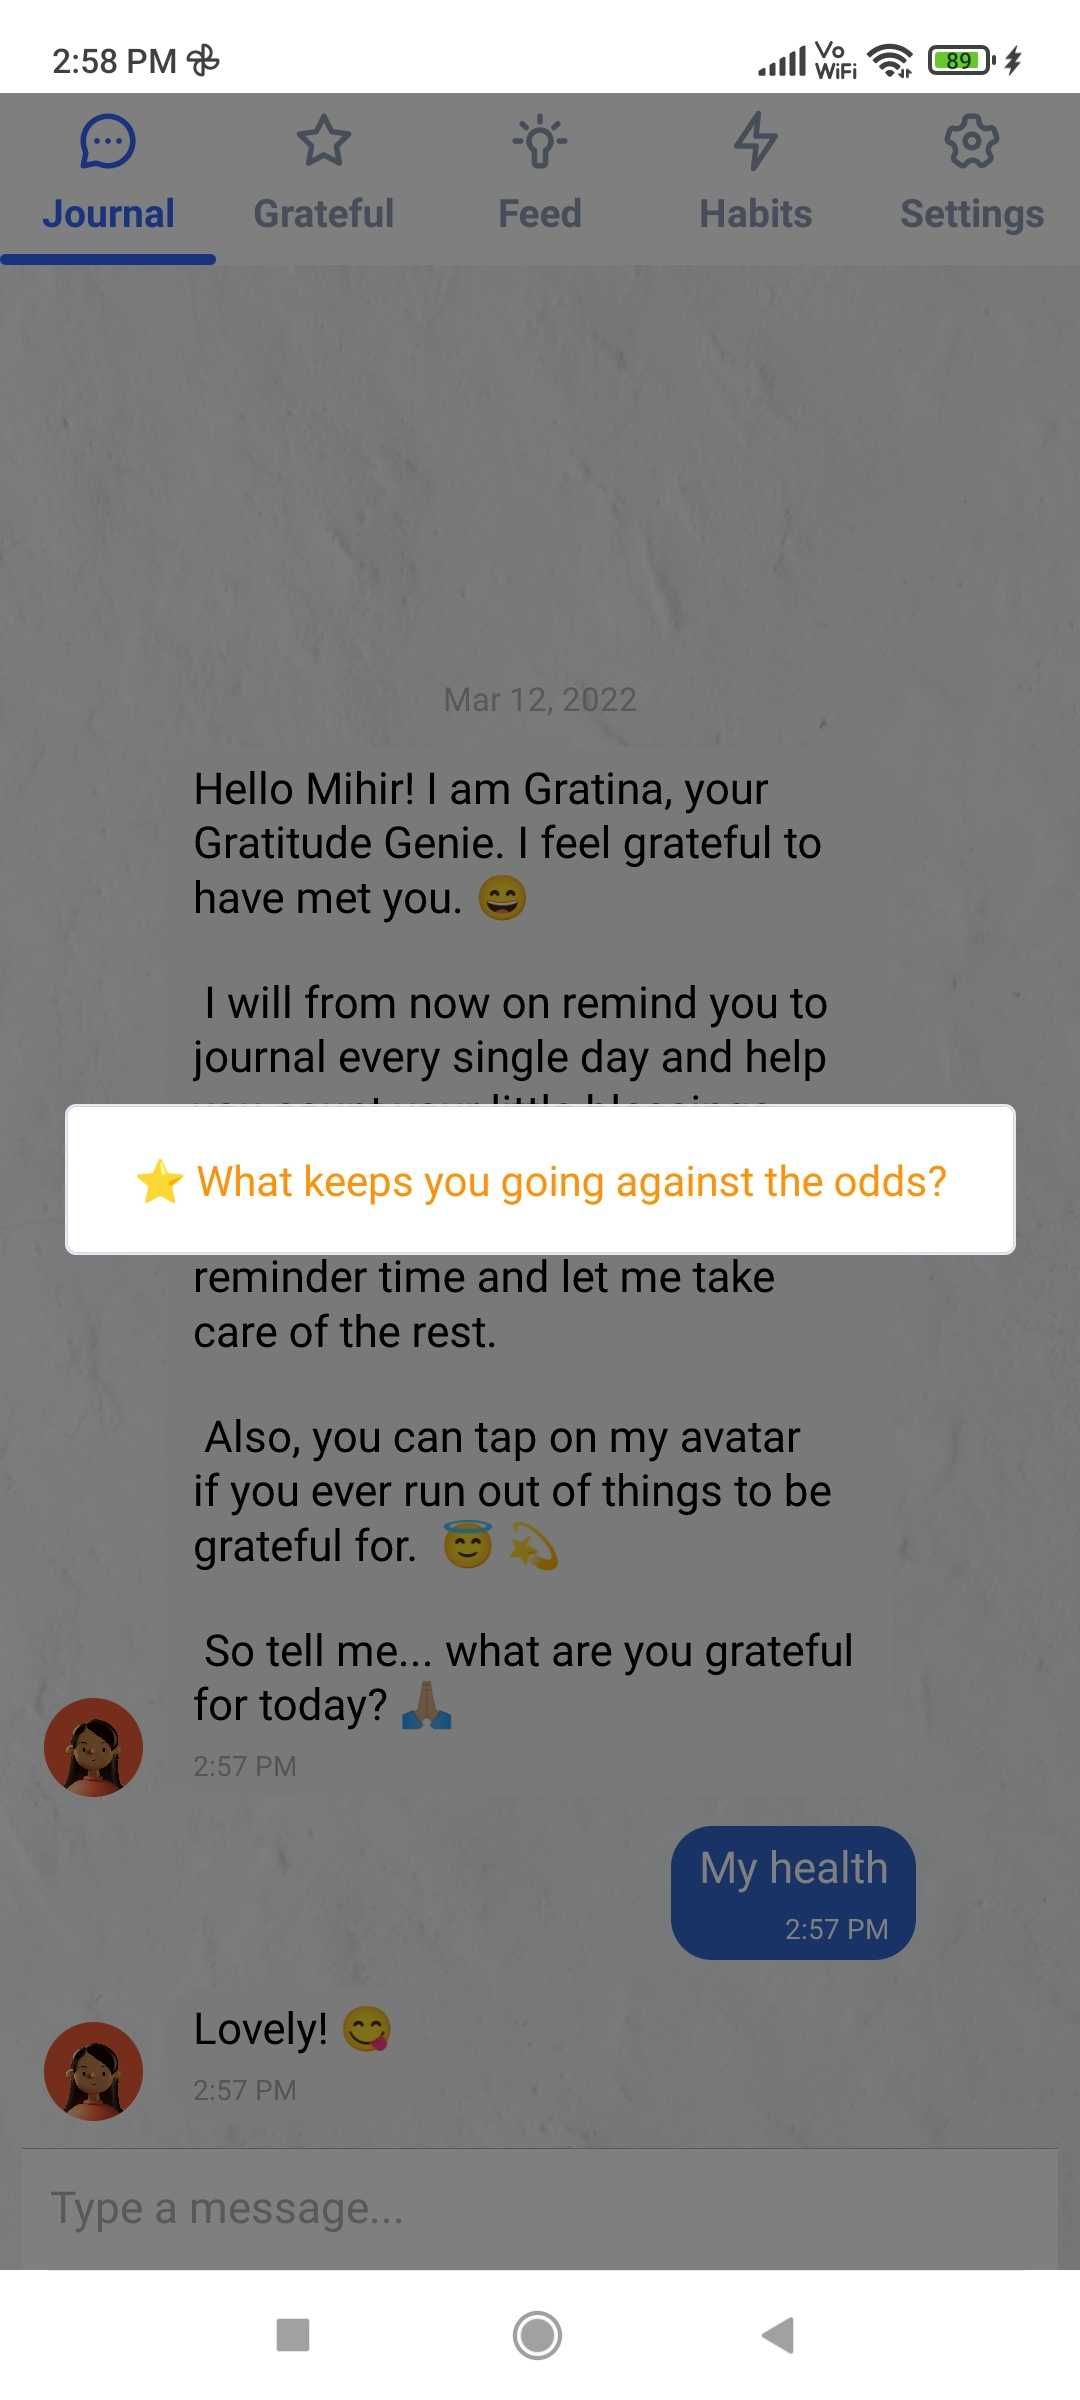 Gratitude Genie has a bot called Gratina whom you chat with to record what you're grateful for